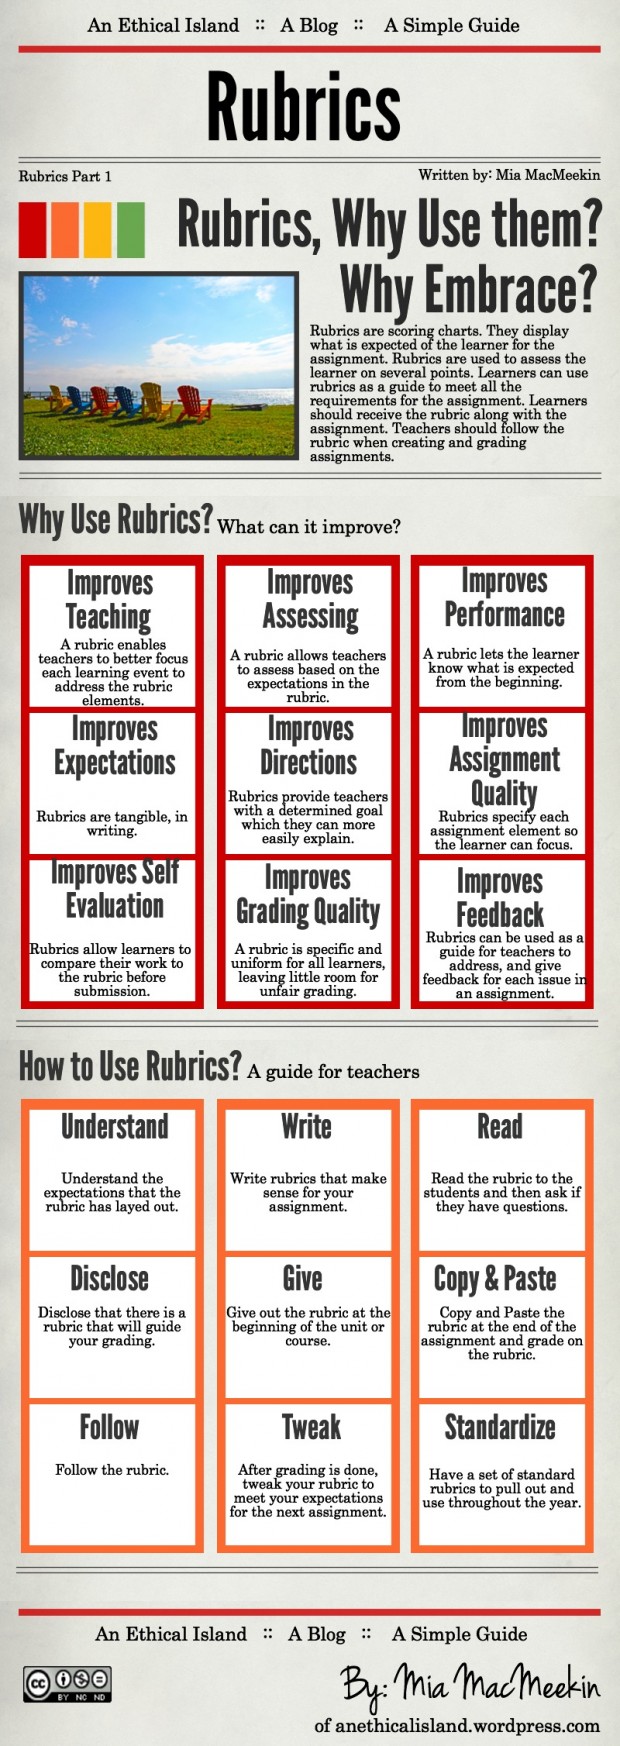 Wonderful Guide to The Use of Rubrics in Education ~ Educational Technology and Mobile Learning